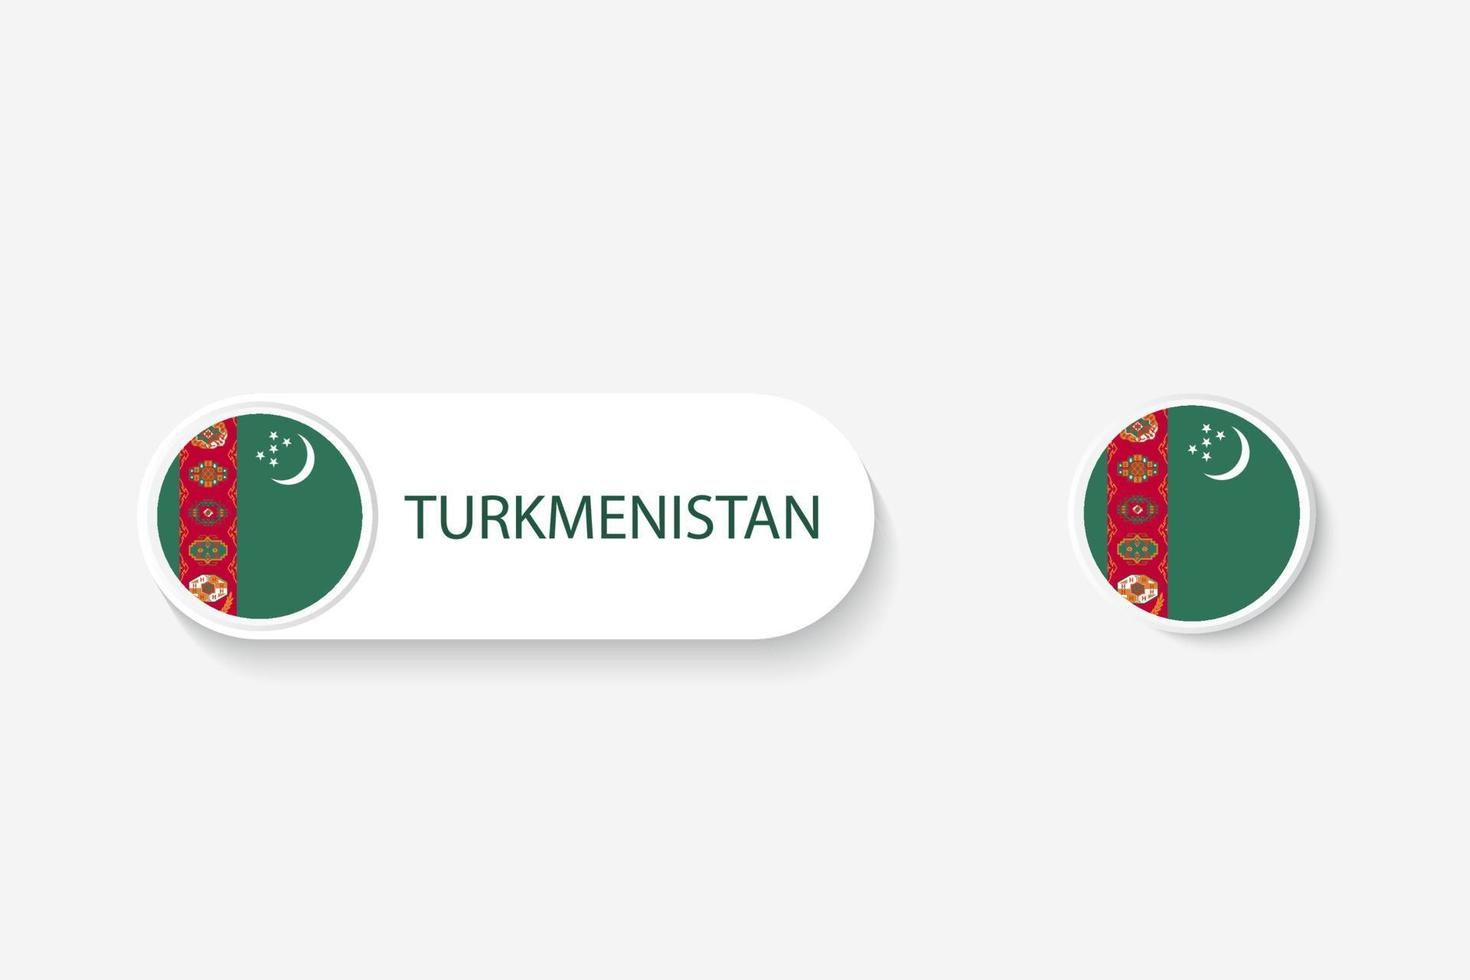 Turkmenistan button flag in illustration of oval shaped with word of Turkmenistan. And button flag Turkmenistan. vector